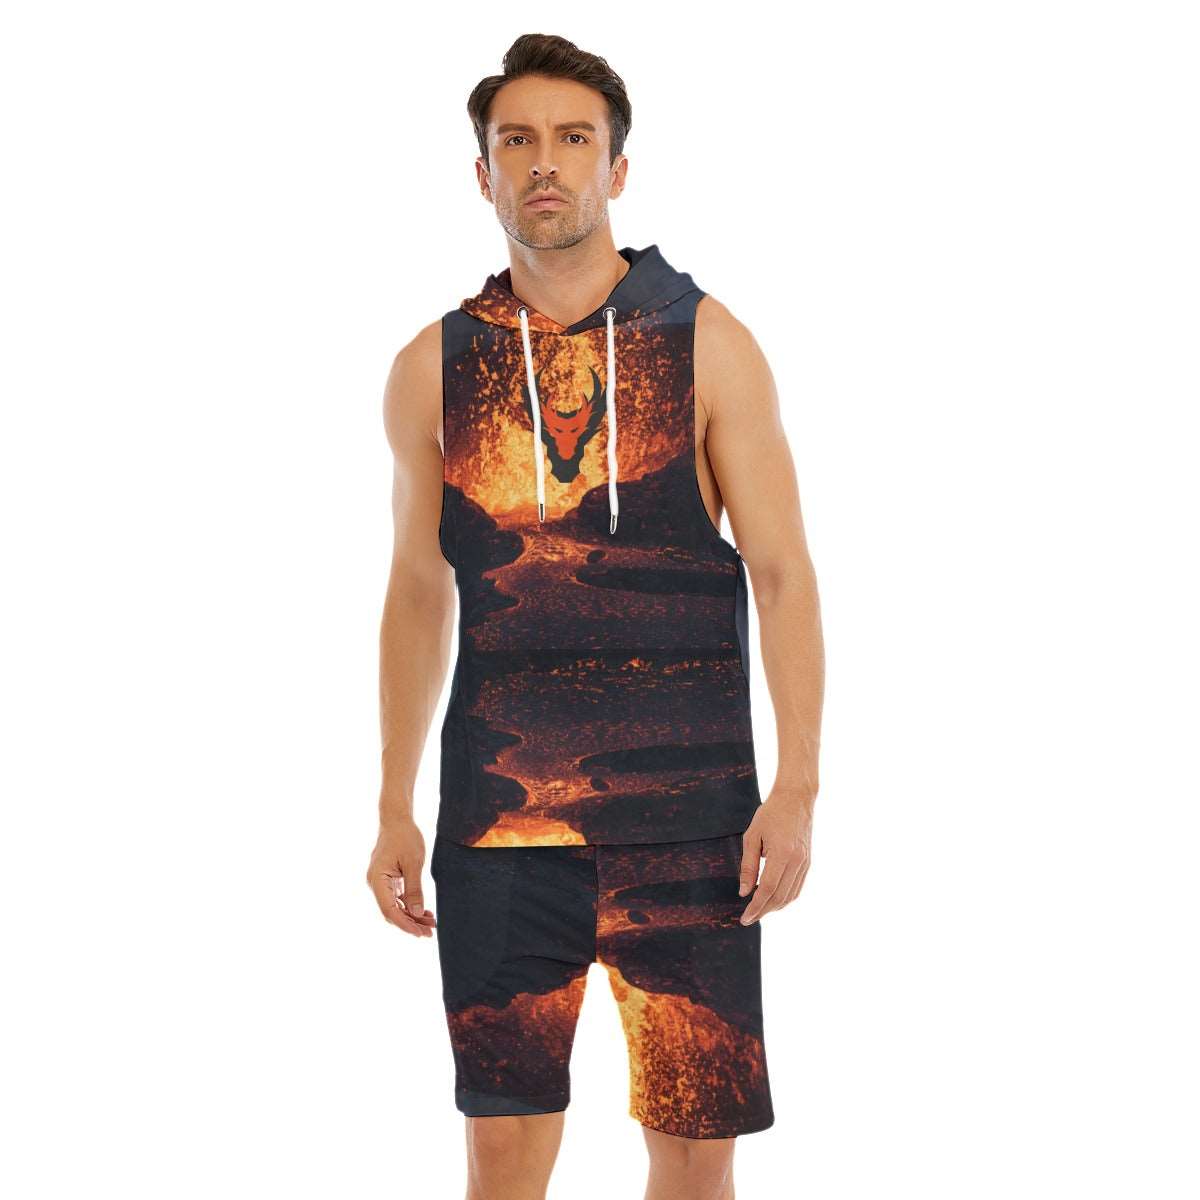 Fired up double dragon Men's Sleeveless Vest And Shorts Sets